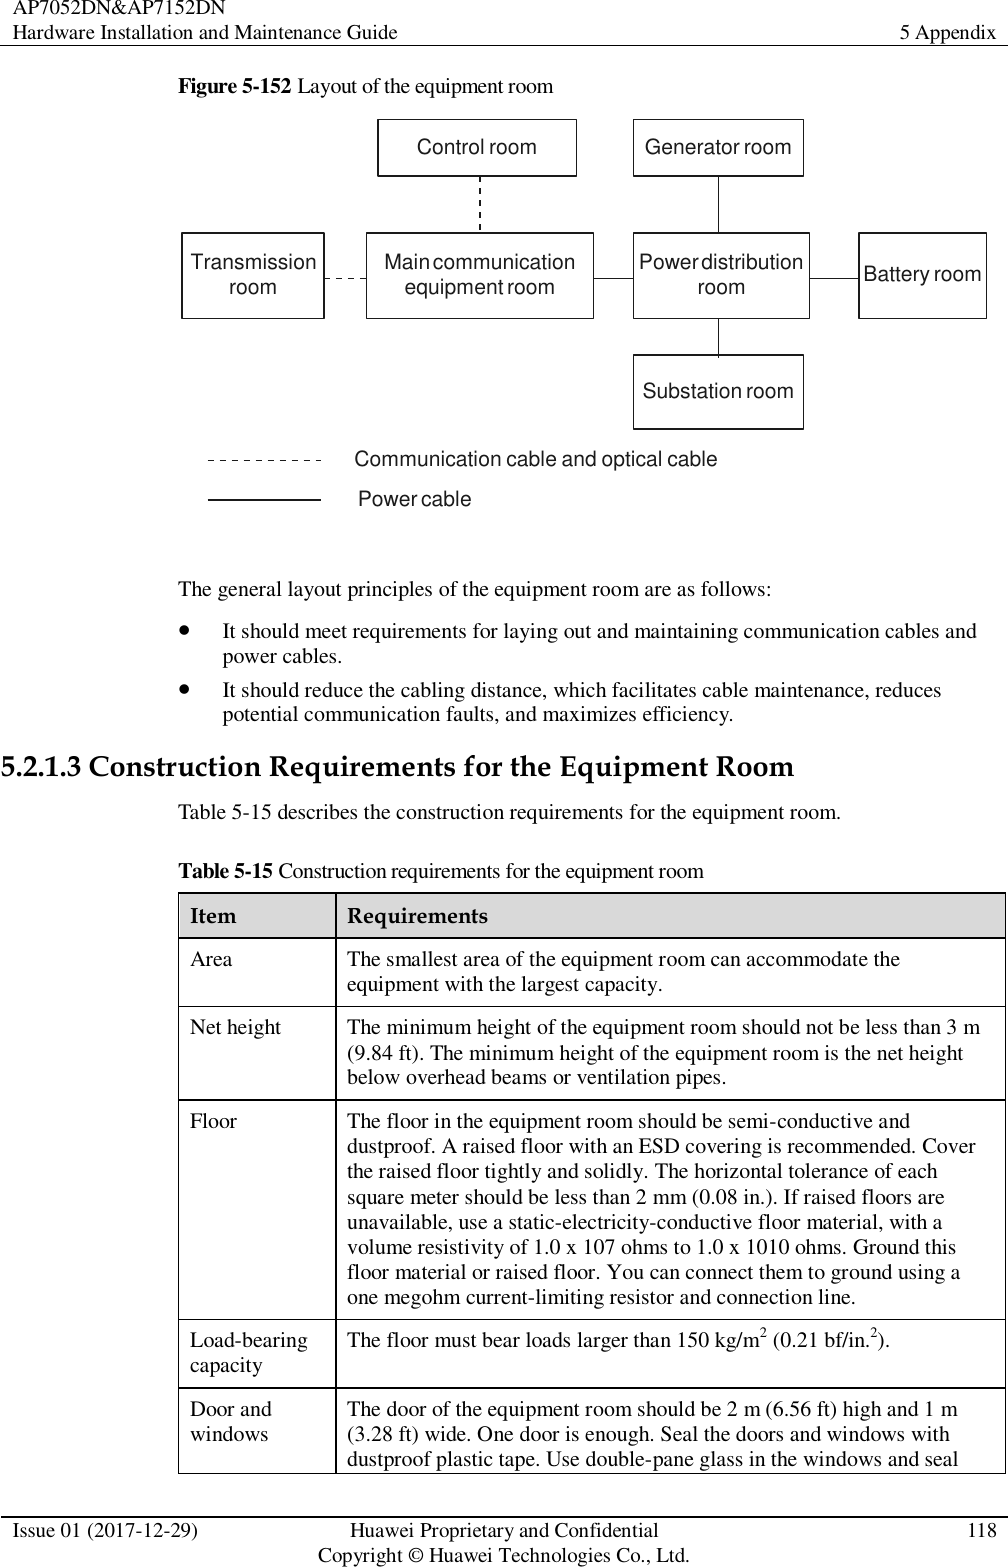 AP7052DN&amp;AP7152DN Hardware Installation and Maintenance Guide 5 Appendix  Issue 01 (2017-12-29) Huawei Proprietary and Confidential                                     Copyright © Huawei Technologies Co., Ltd. 118  Figure 5-152 Layout of the equipment room Control room Generator roomTransmissionroom Main communicationequipment room Power distributionroom Battery roomSubstation room Communication cable and optical cablePower cable  The general layout principles of the equipment room are as follows:  It should meet requirements for laying out and maintaining communication cables and power cables.  It should reduce the cabling distance, which facilitates cable maintenance, reduces potential communication faults, and maximizes efficiency. 5.2.1.3 Construction Requirements for the Equipment Room Table 5-15 describes the construction requirements for the equipment room. Table 5-15 Construction requirements for the equipment room Item Requirements Area The smallest area of the equipment room can accommodate the equipment with the largest capacity. Net height The minimum height of the equipment room should not be less than 3 m (9.84 ft). The minimum height of the equipment room is the net height below overhead beams or ventilation pipes.   Floor The floor in the equipment room should be semi-conductive and dustproof. A raised floor with an ESD covering is recommended. Cover the raised floor tightly and solidly. The horizontal tolerance of each square meter should be less than 2 mm (0.08 in.). If raised floors are unavailable, use a static-electricity-conductive floor material, with a volume resistivity of 1.0 x 107 ohms to 1.0 x 1010 ohms. Ground this floor material or raised floor. You can connect them to ground using a one megohm current-limiting resistor and connection line. Load-bearing capacity The floor must bear loads larger than 150 kg/m2 (0.21 bf/in.2).   Door and windows The door of the equipment room should be 2 m (6.56 ft) high and 1 m (3.28 ft) wide. One door is enough. Seal the doors and windows with dustproof plastic tape. Use double-pane glass in the windows and seal 